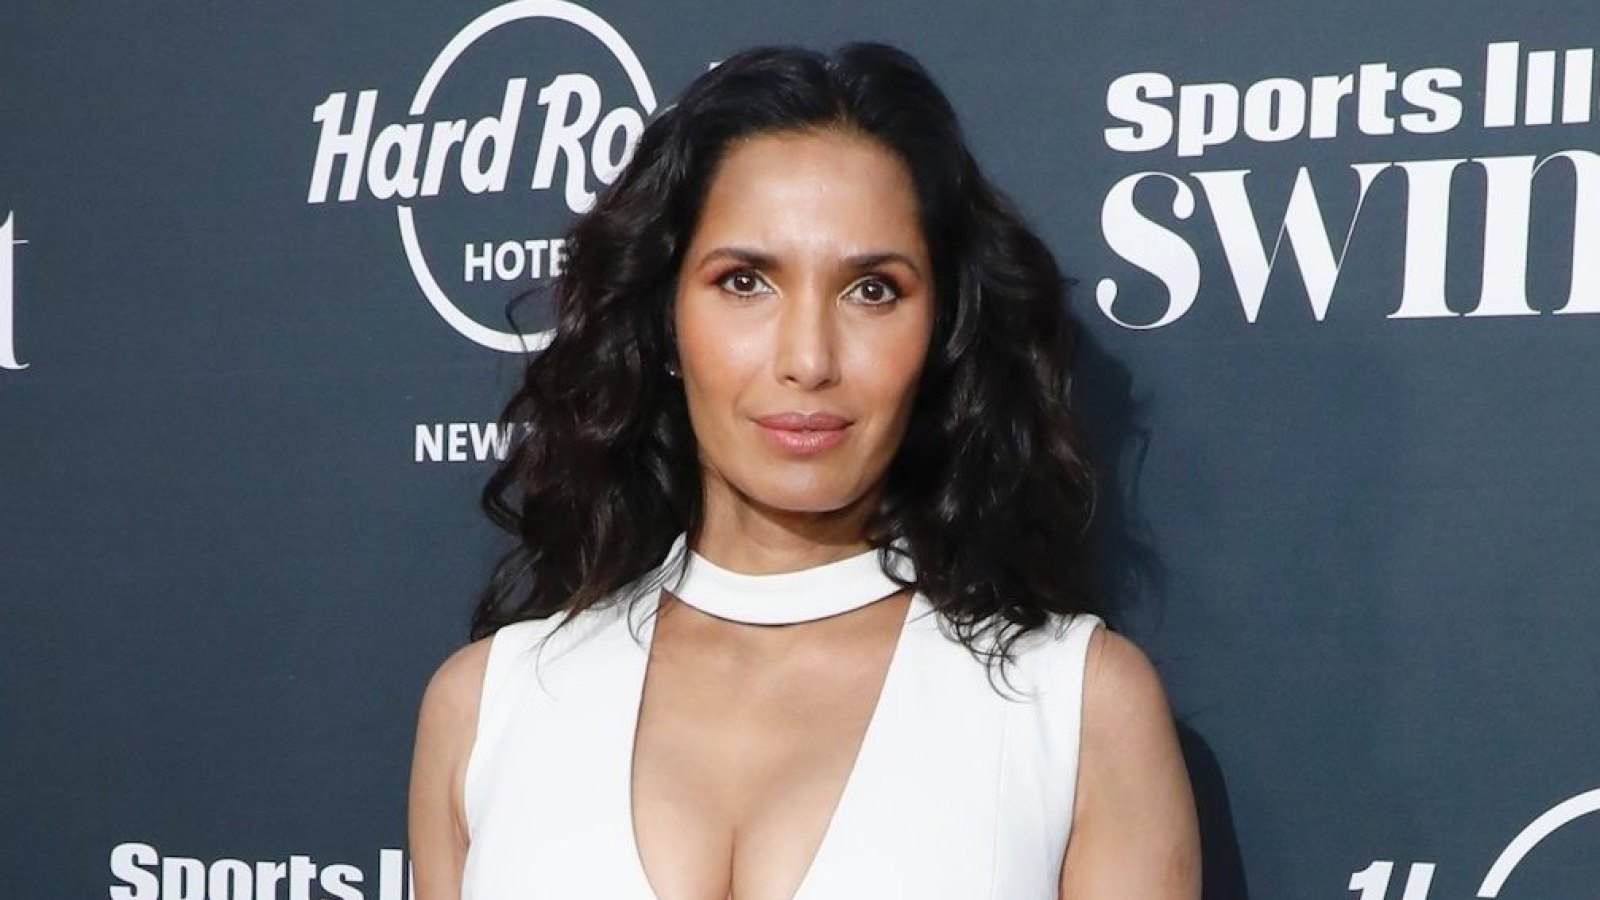 Padma Lakshmi Announces Top Chef Exit After 17 Years